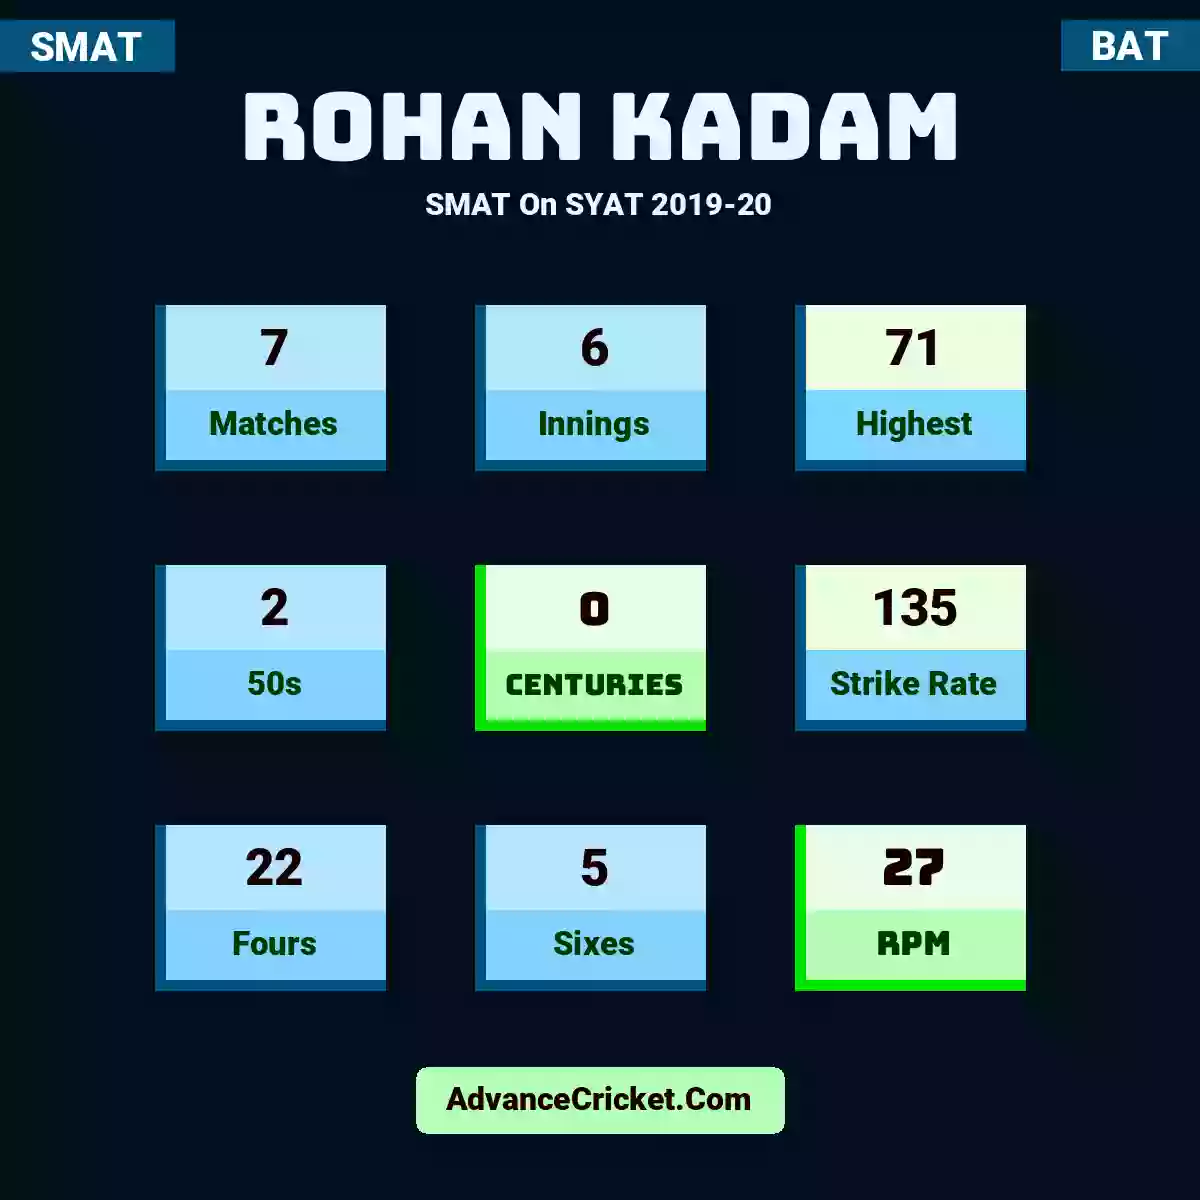 Rohan Kadam SMAT  On SYAT 2019-20, Rohan Kadam played 7 matches, scored 71 runs as highest, 2 half-centuries, and 0 centuries, with a strike rate of 135. R.Kadam hit 22 fours and 5 sixes, with an RPM of 27.